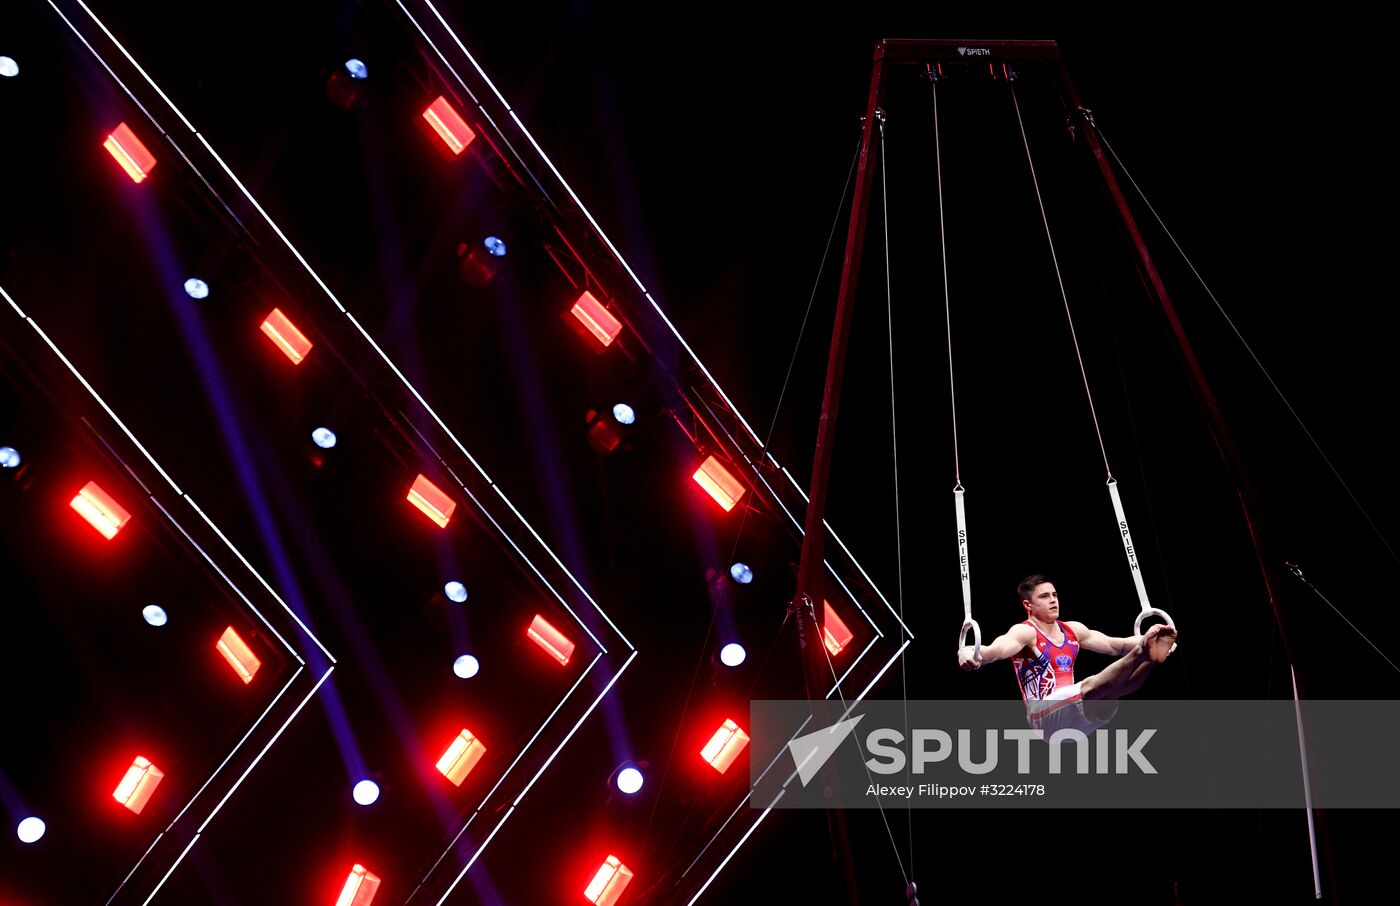 Final rehearsal of Alexei Nemov's show 'Legends of Sport: The Ascent'